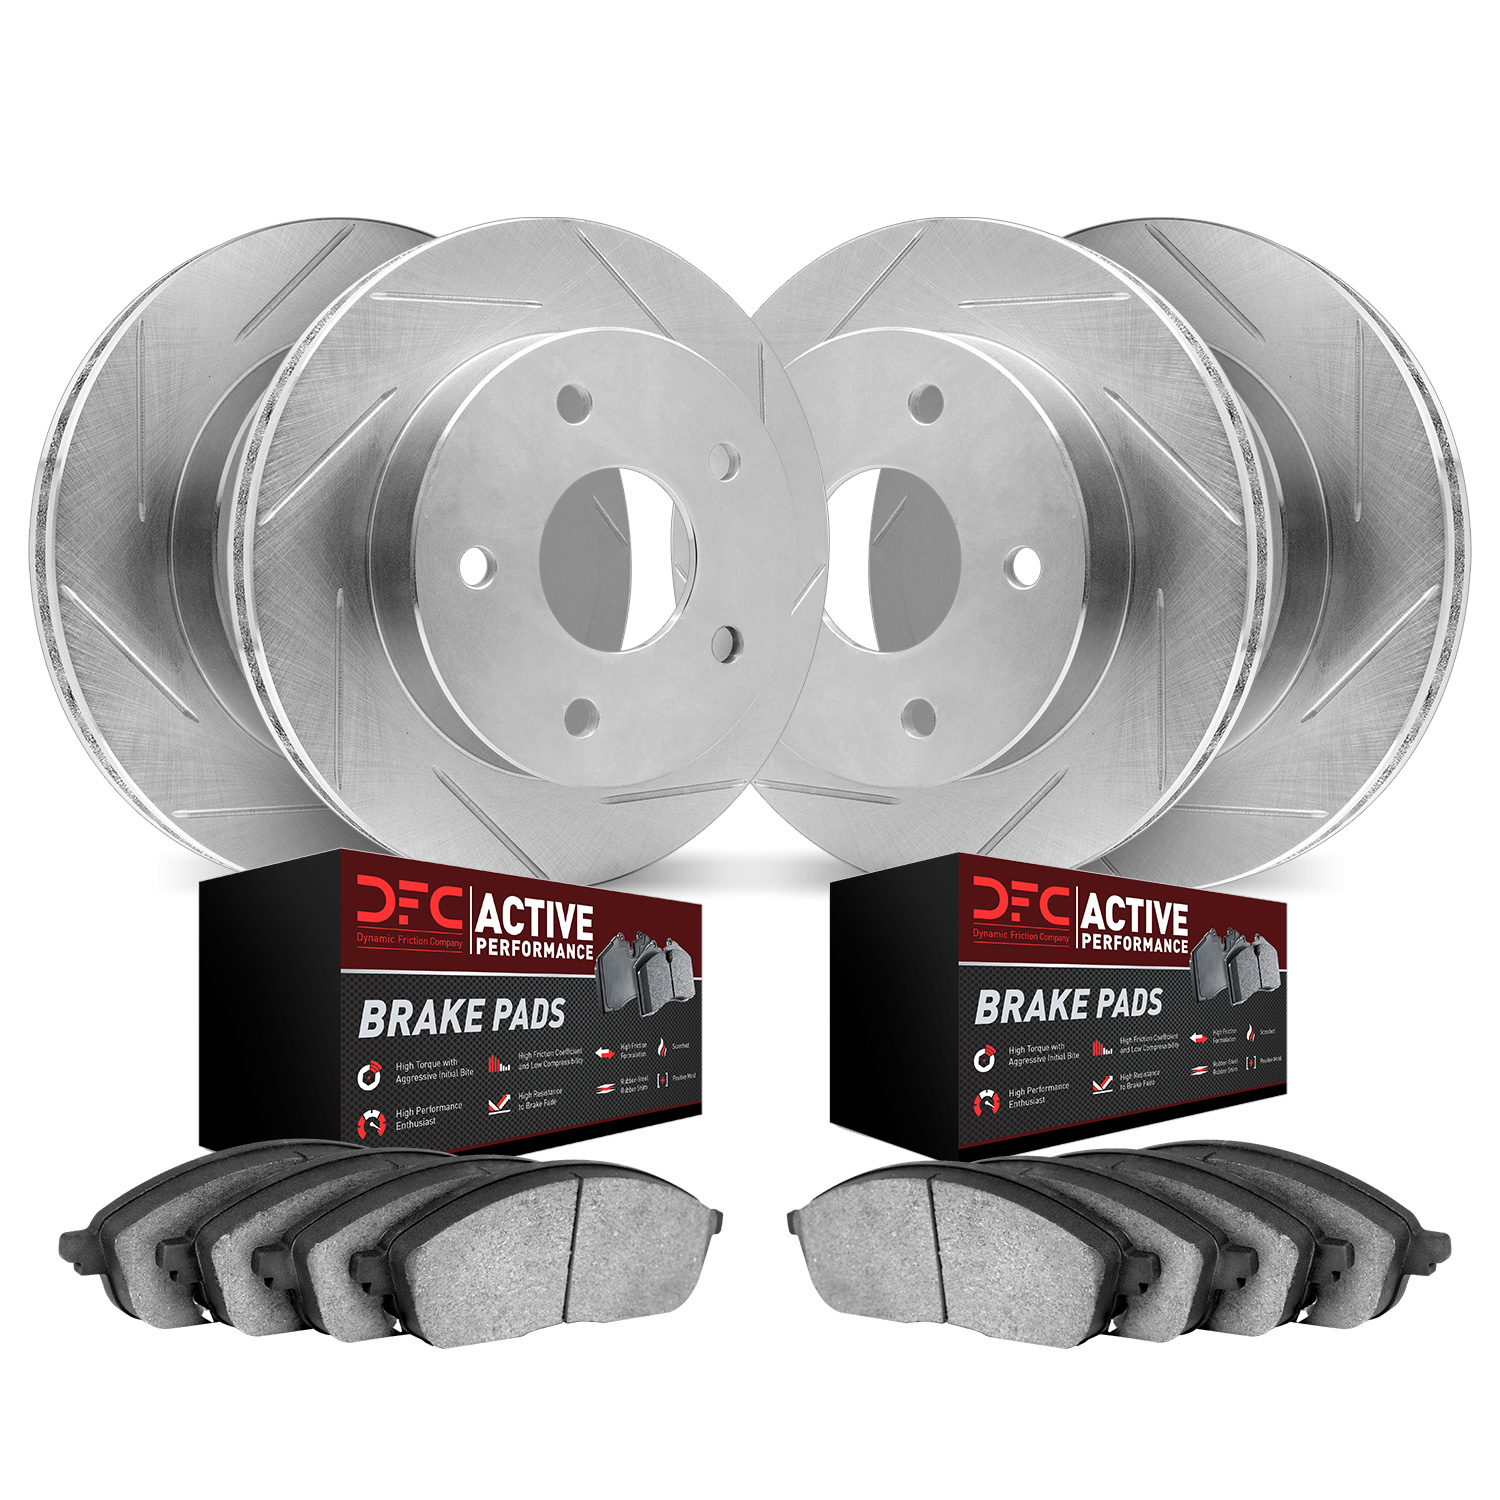 2704-31046 Geoperformance Slotted Brake Rotors with Active Performance Pads Kits, 2001-2006 BMW, Position: Front and Rear